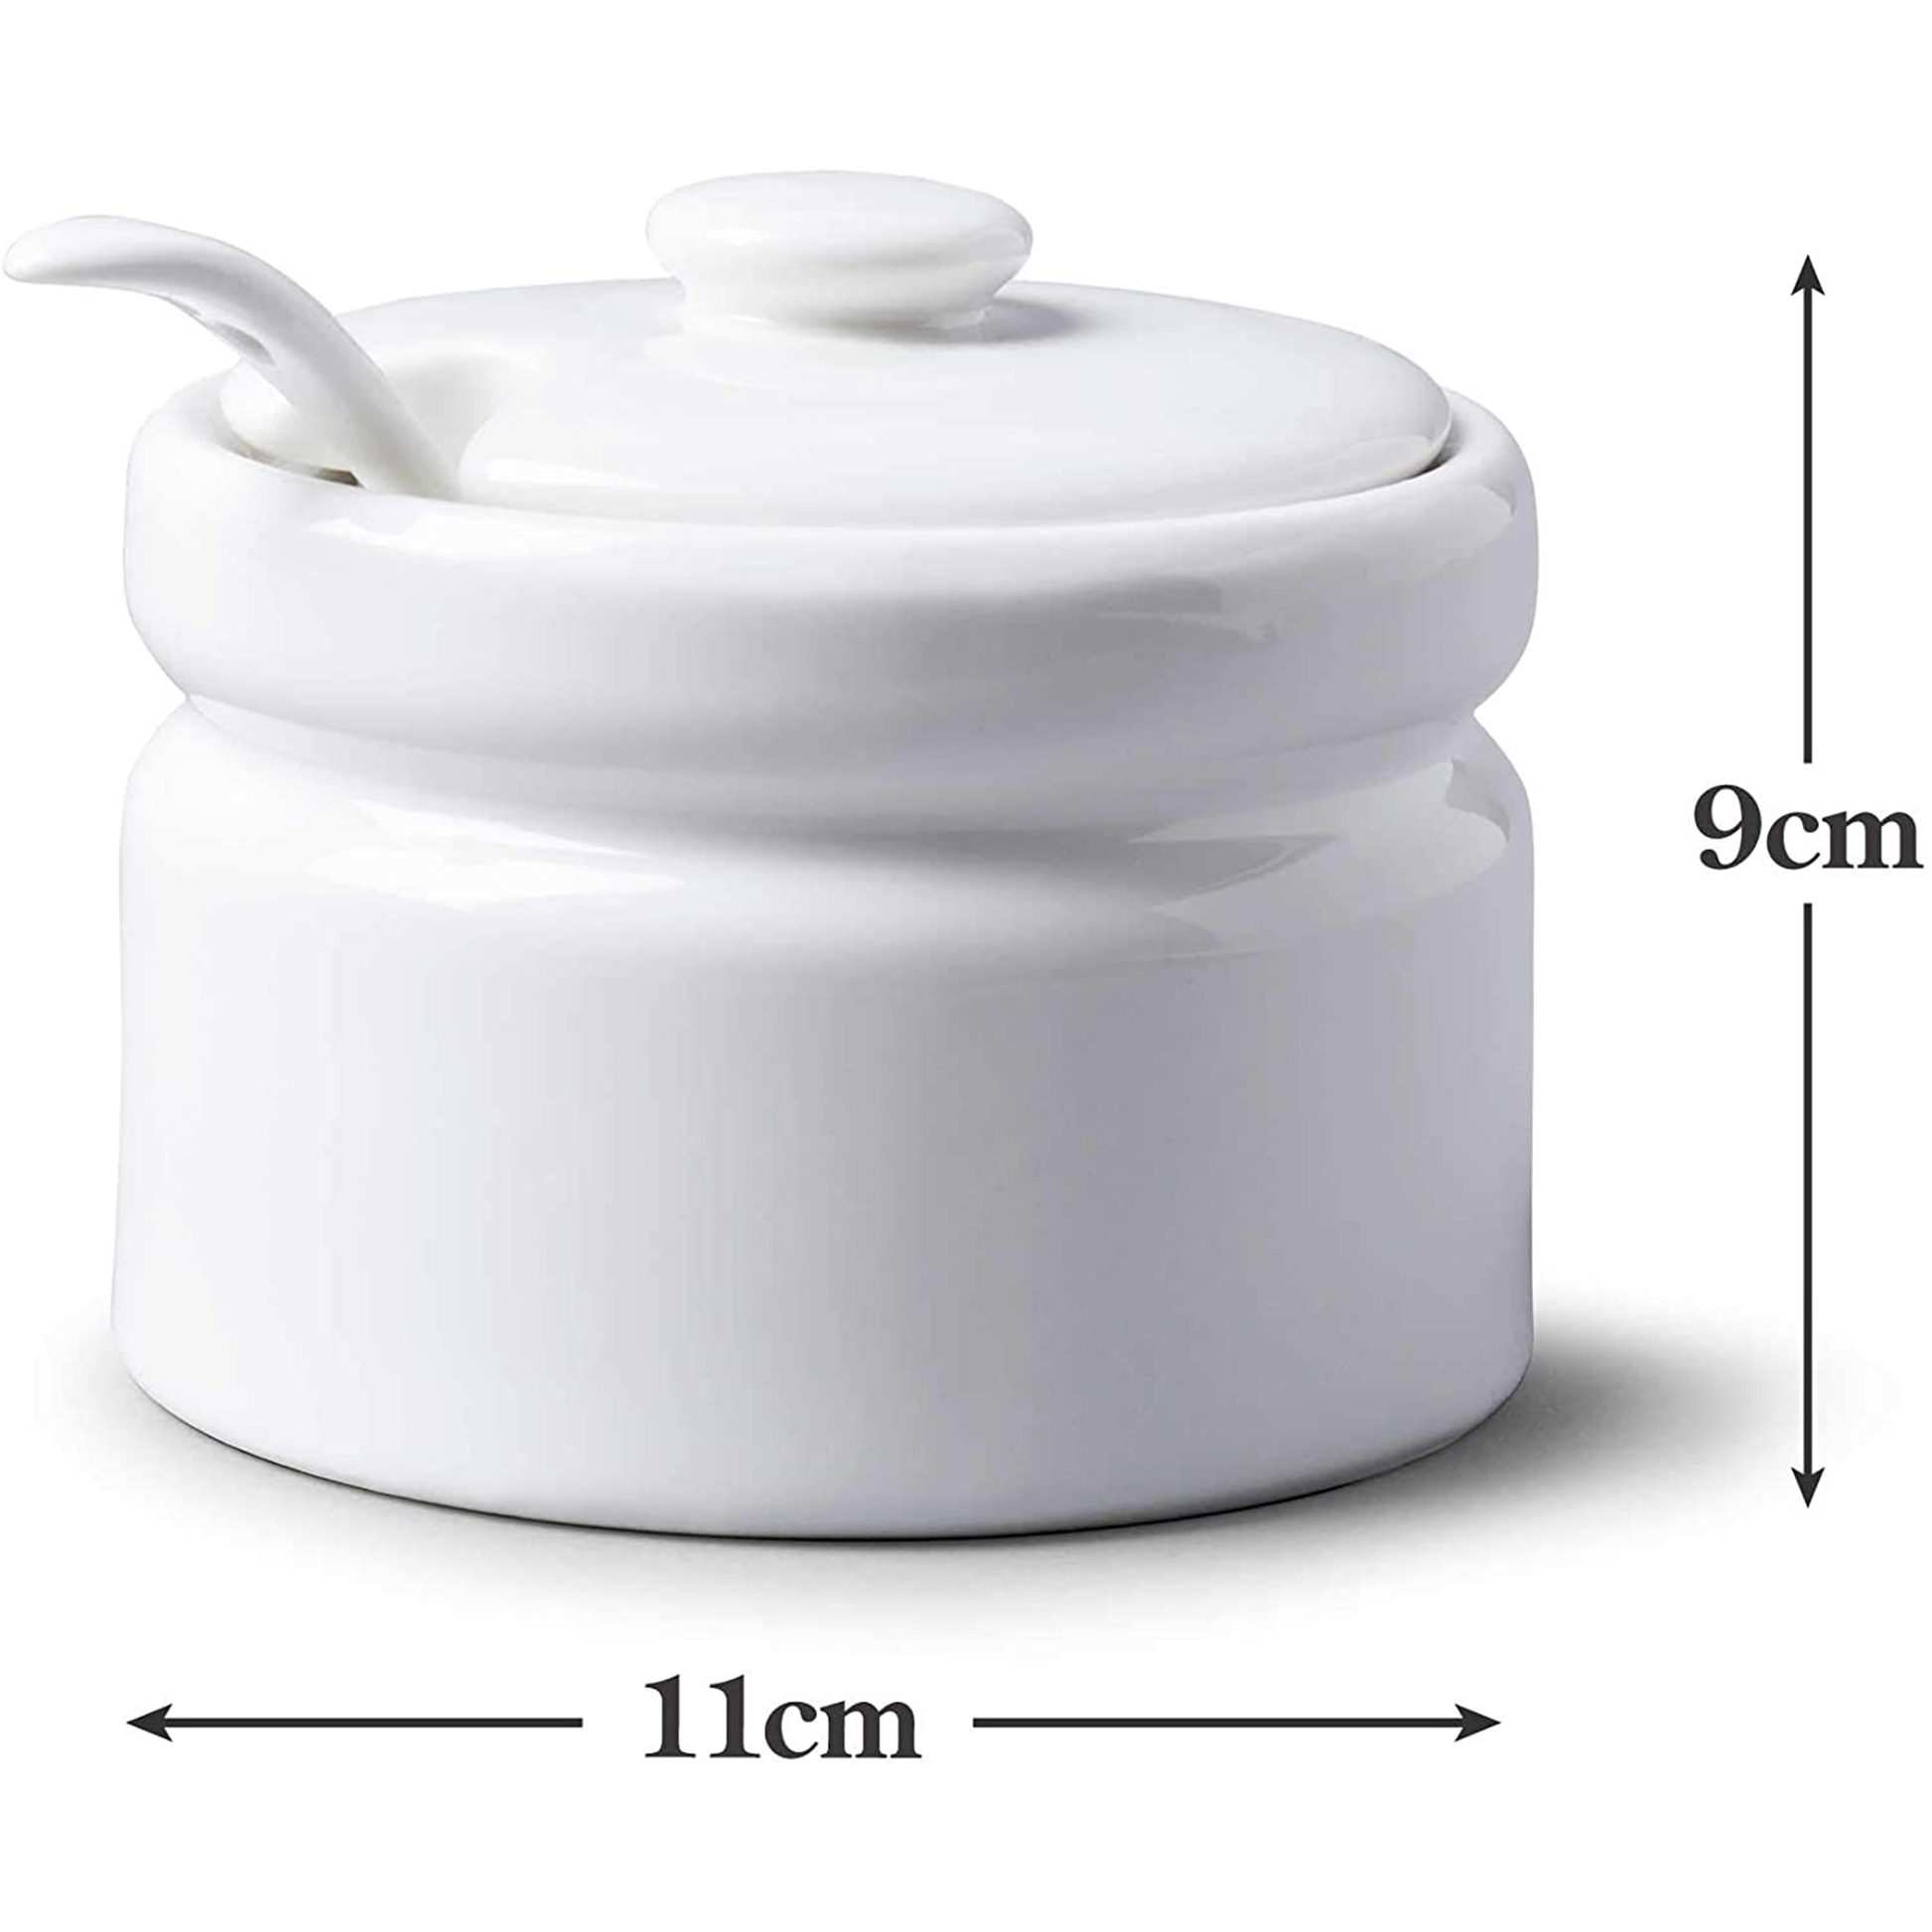 an image depicting the dimensions of the sugar pot